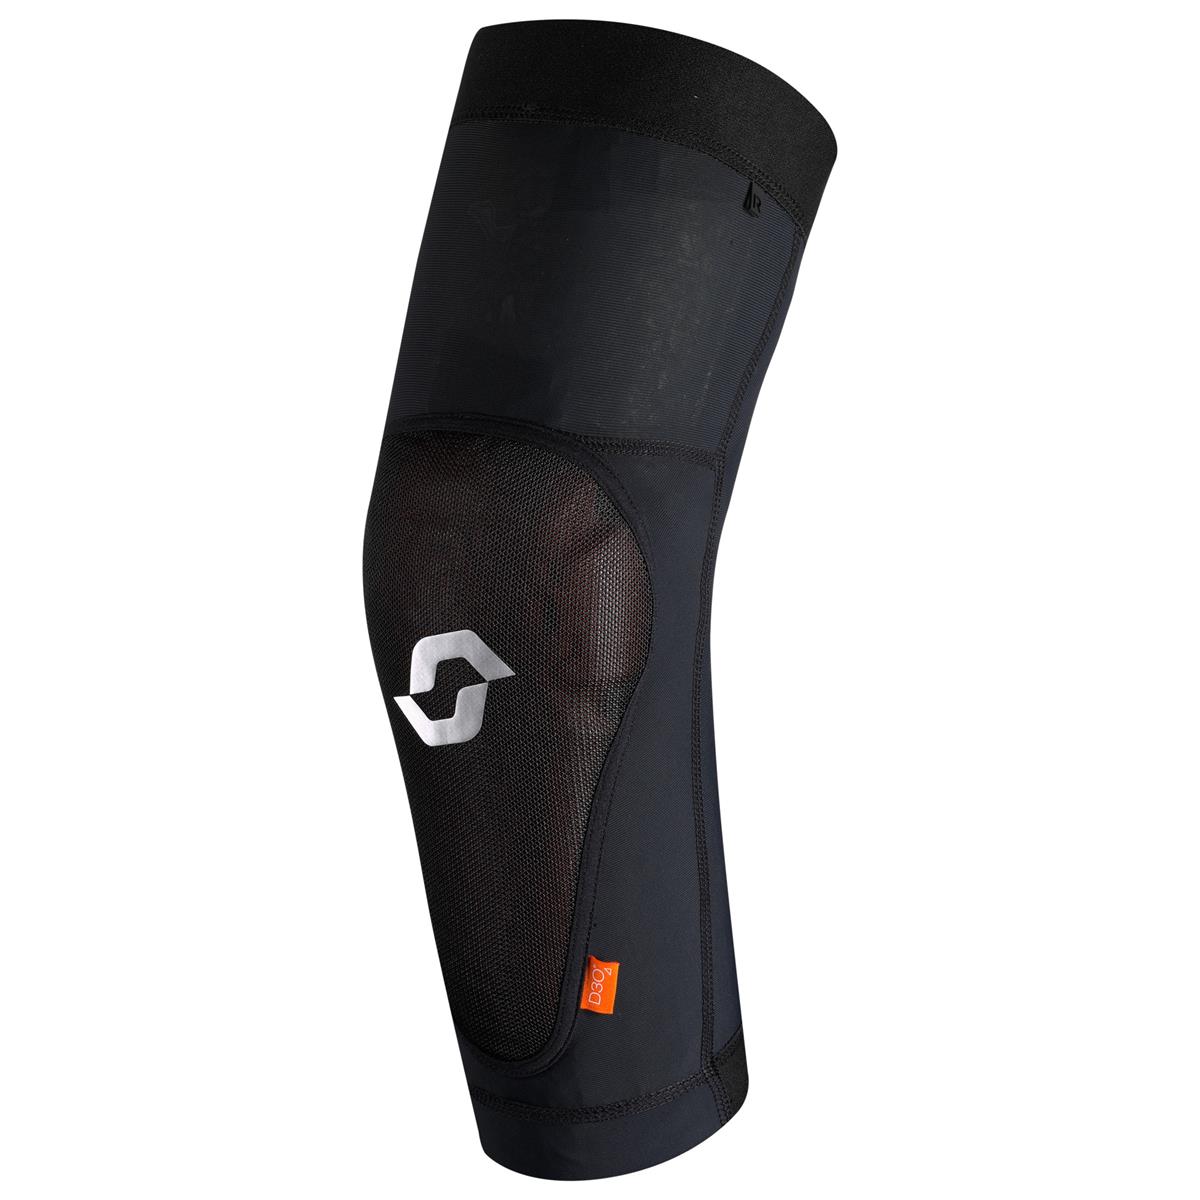 Elbow guards Softcon 2 Black/Grey - Size S